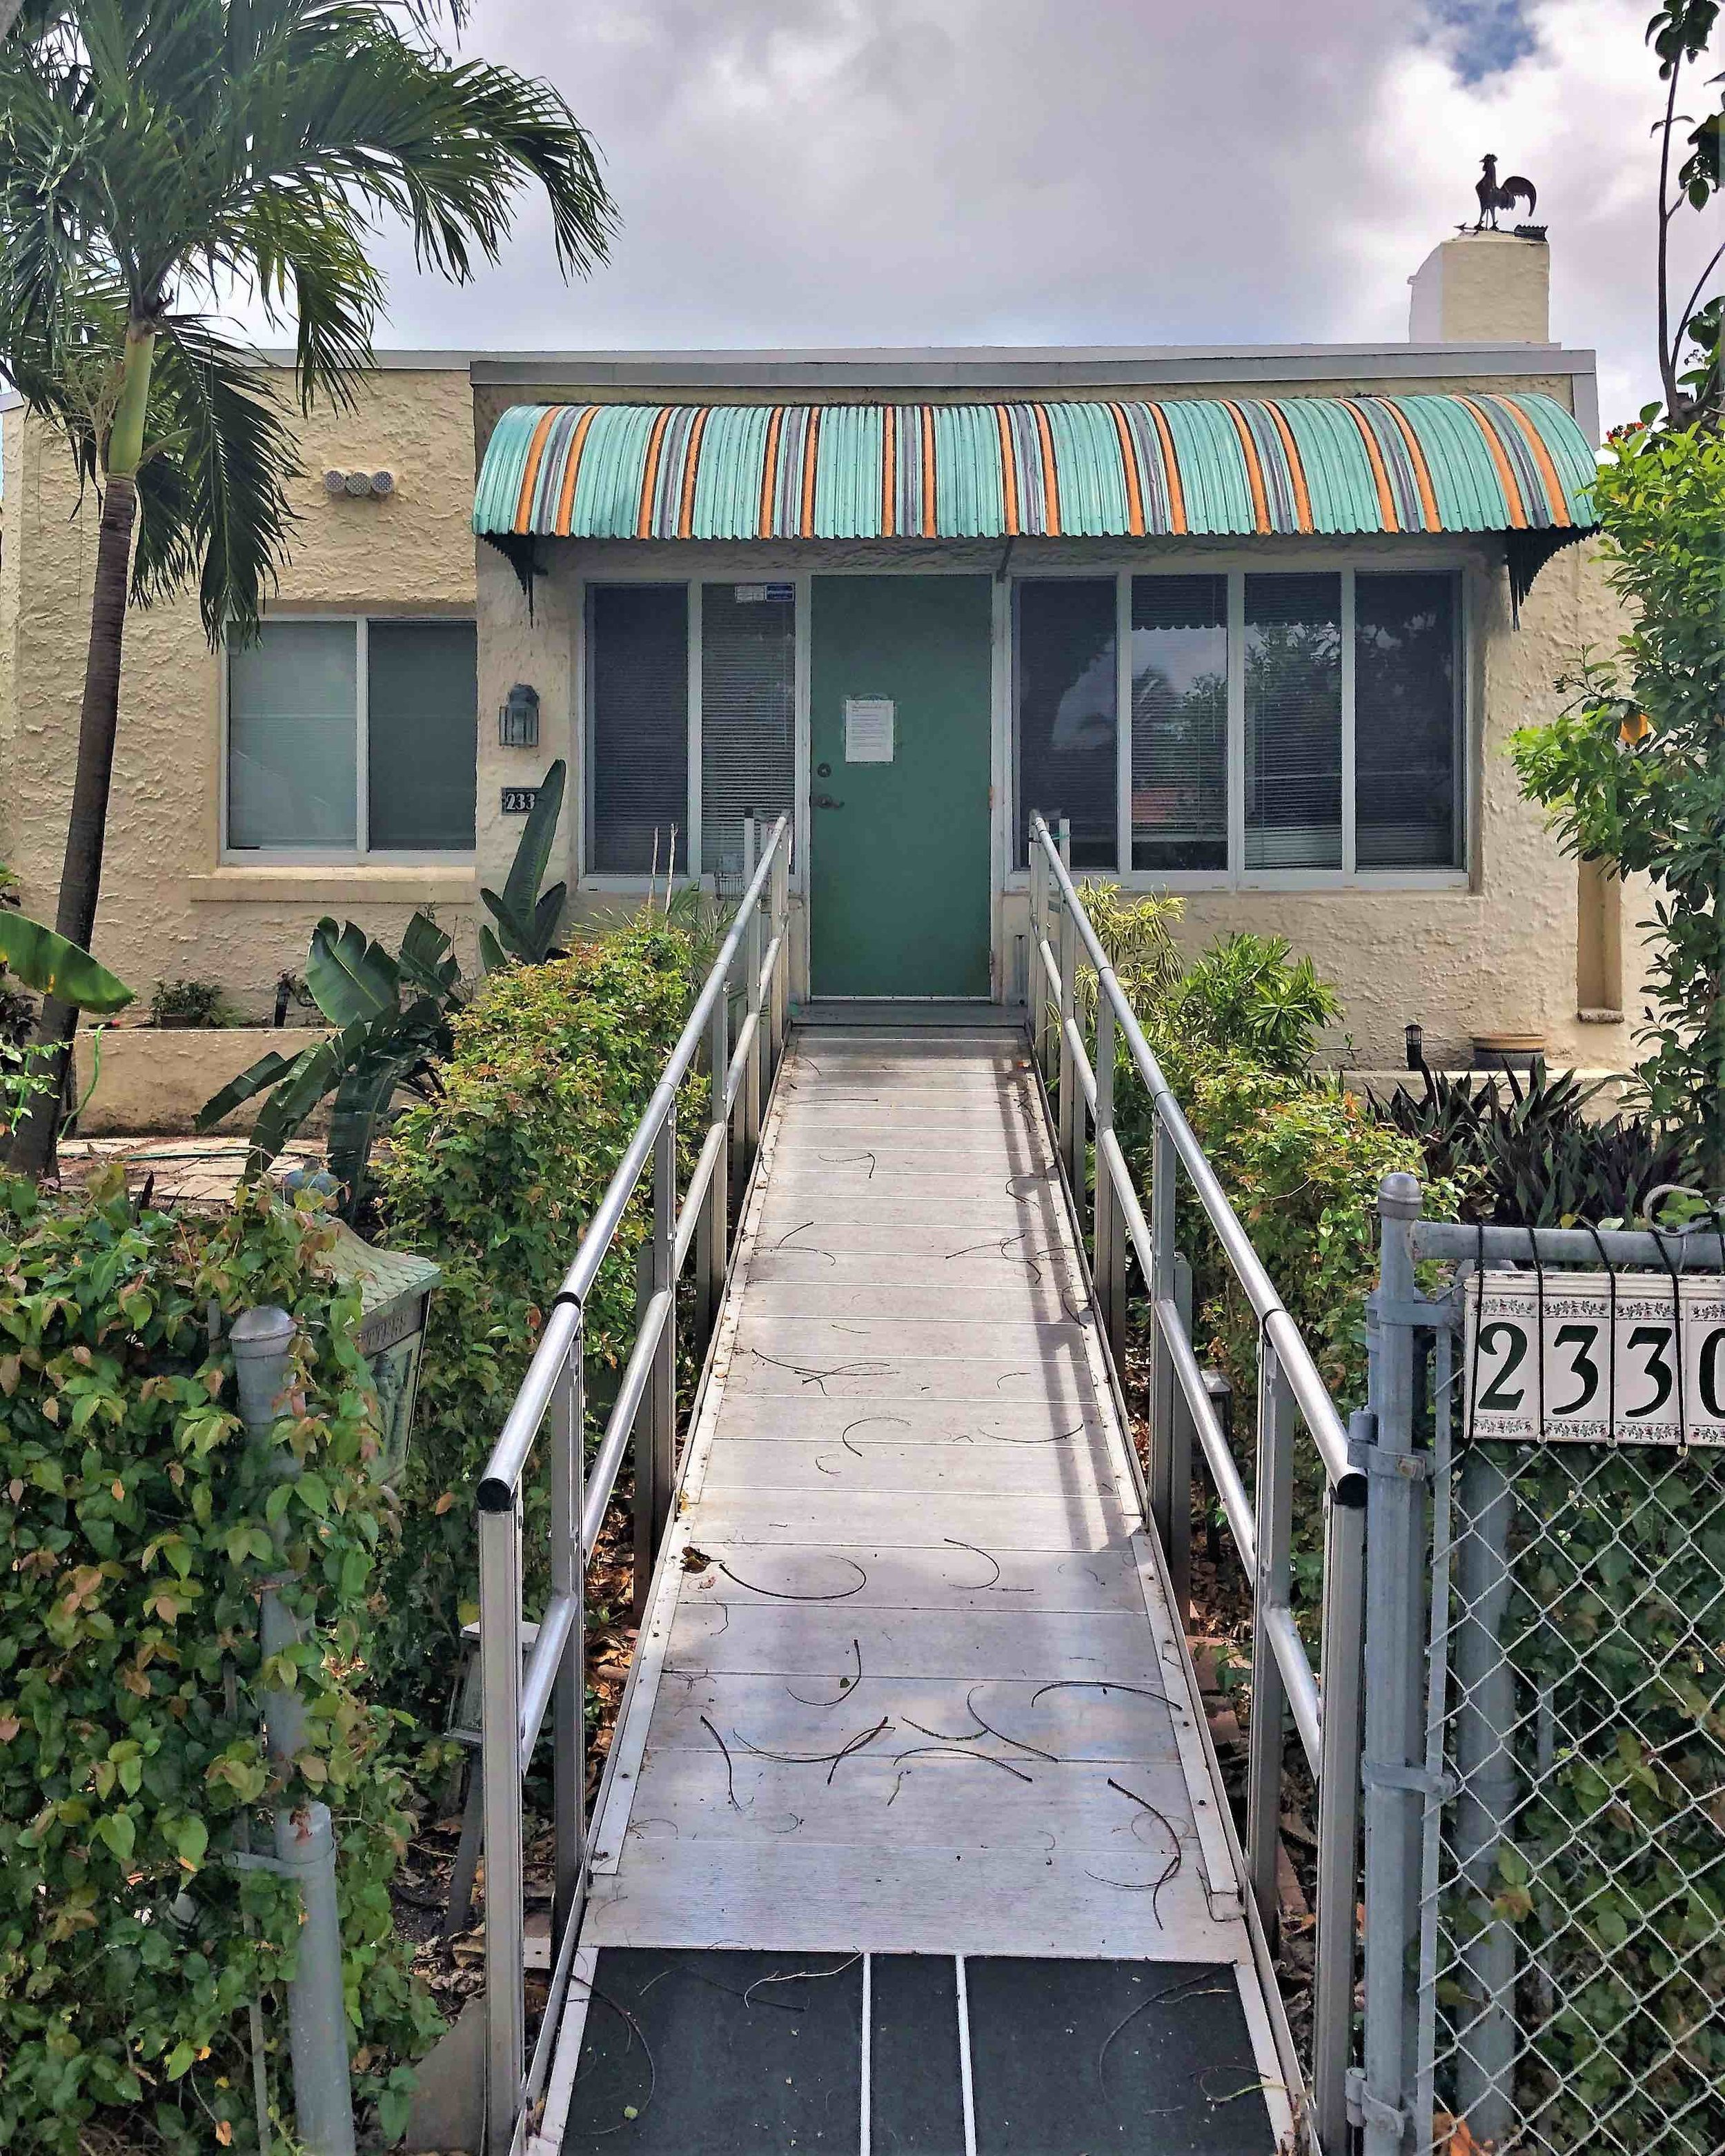  A ramp with non skid tape runs front door to sidewalk and serves a house elevated far above the flood plain in Miami, ground zero for sea-level rise. 